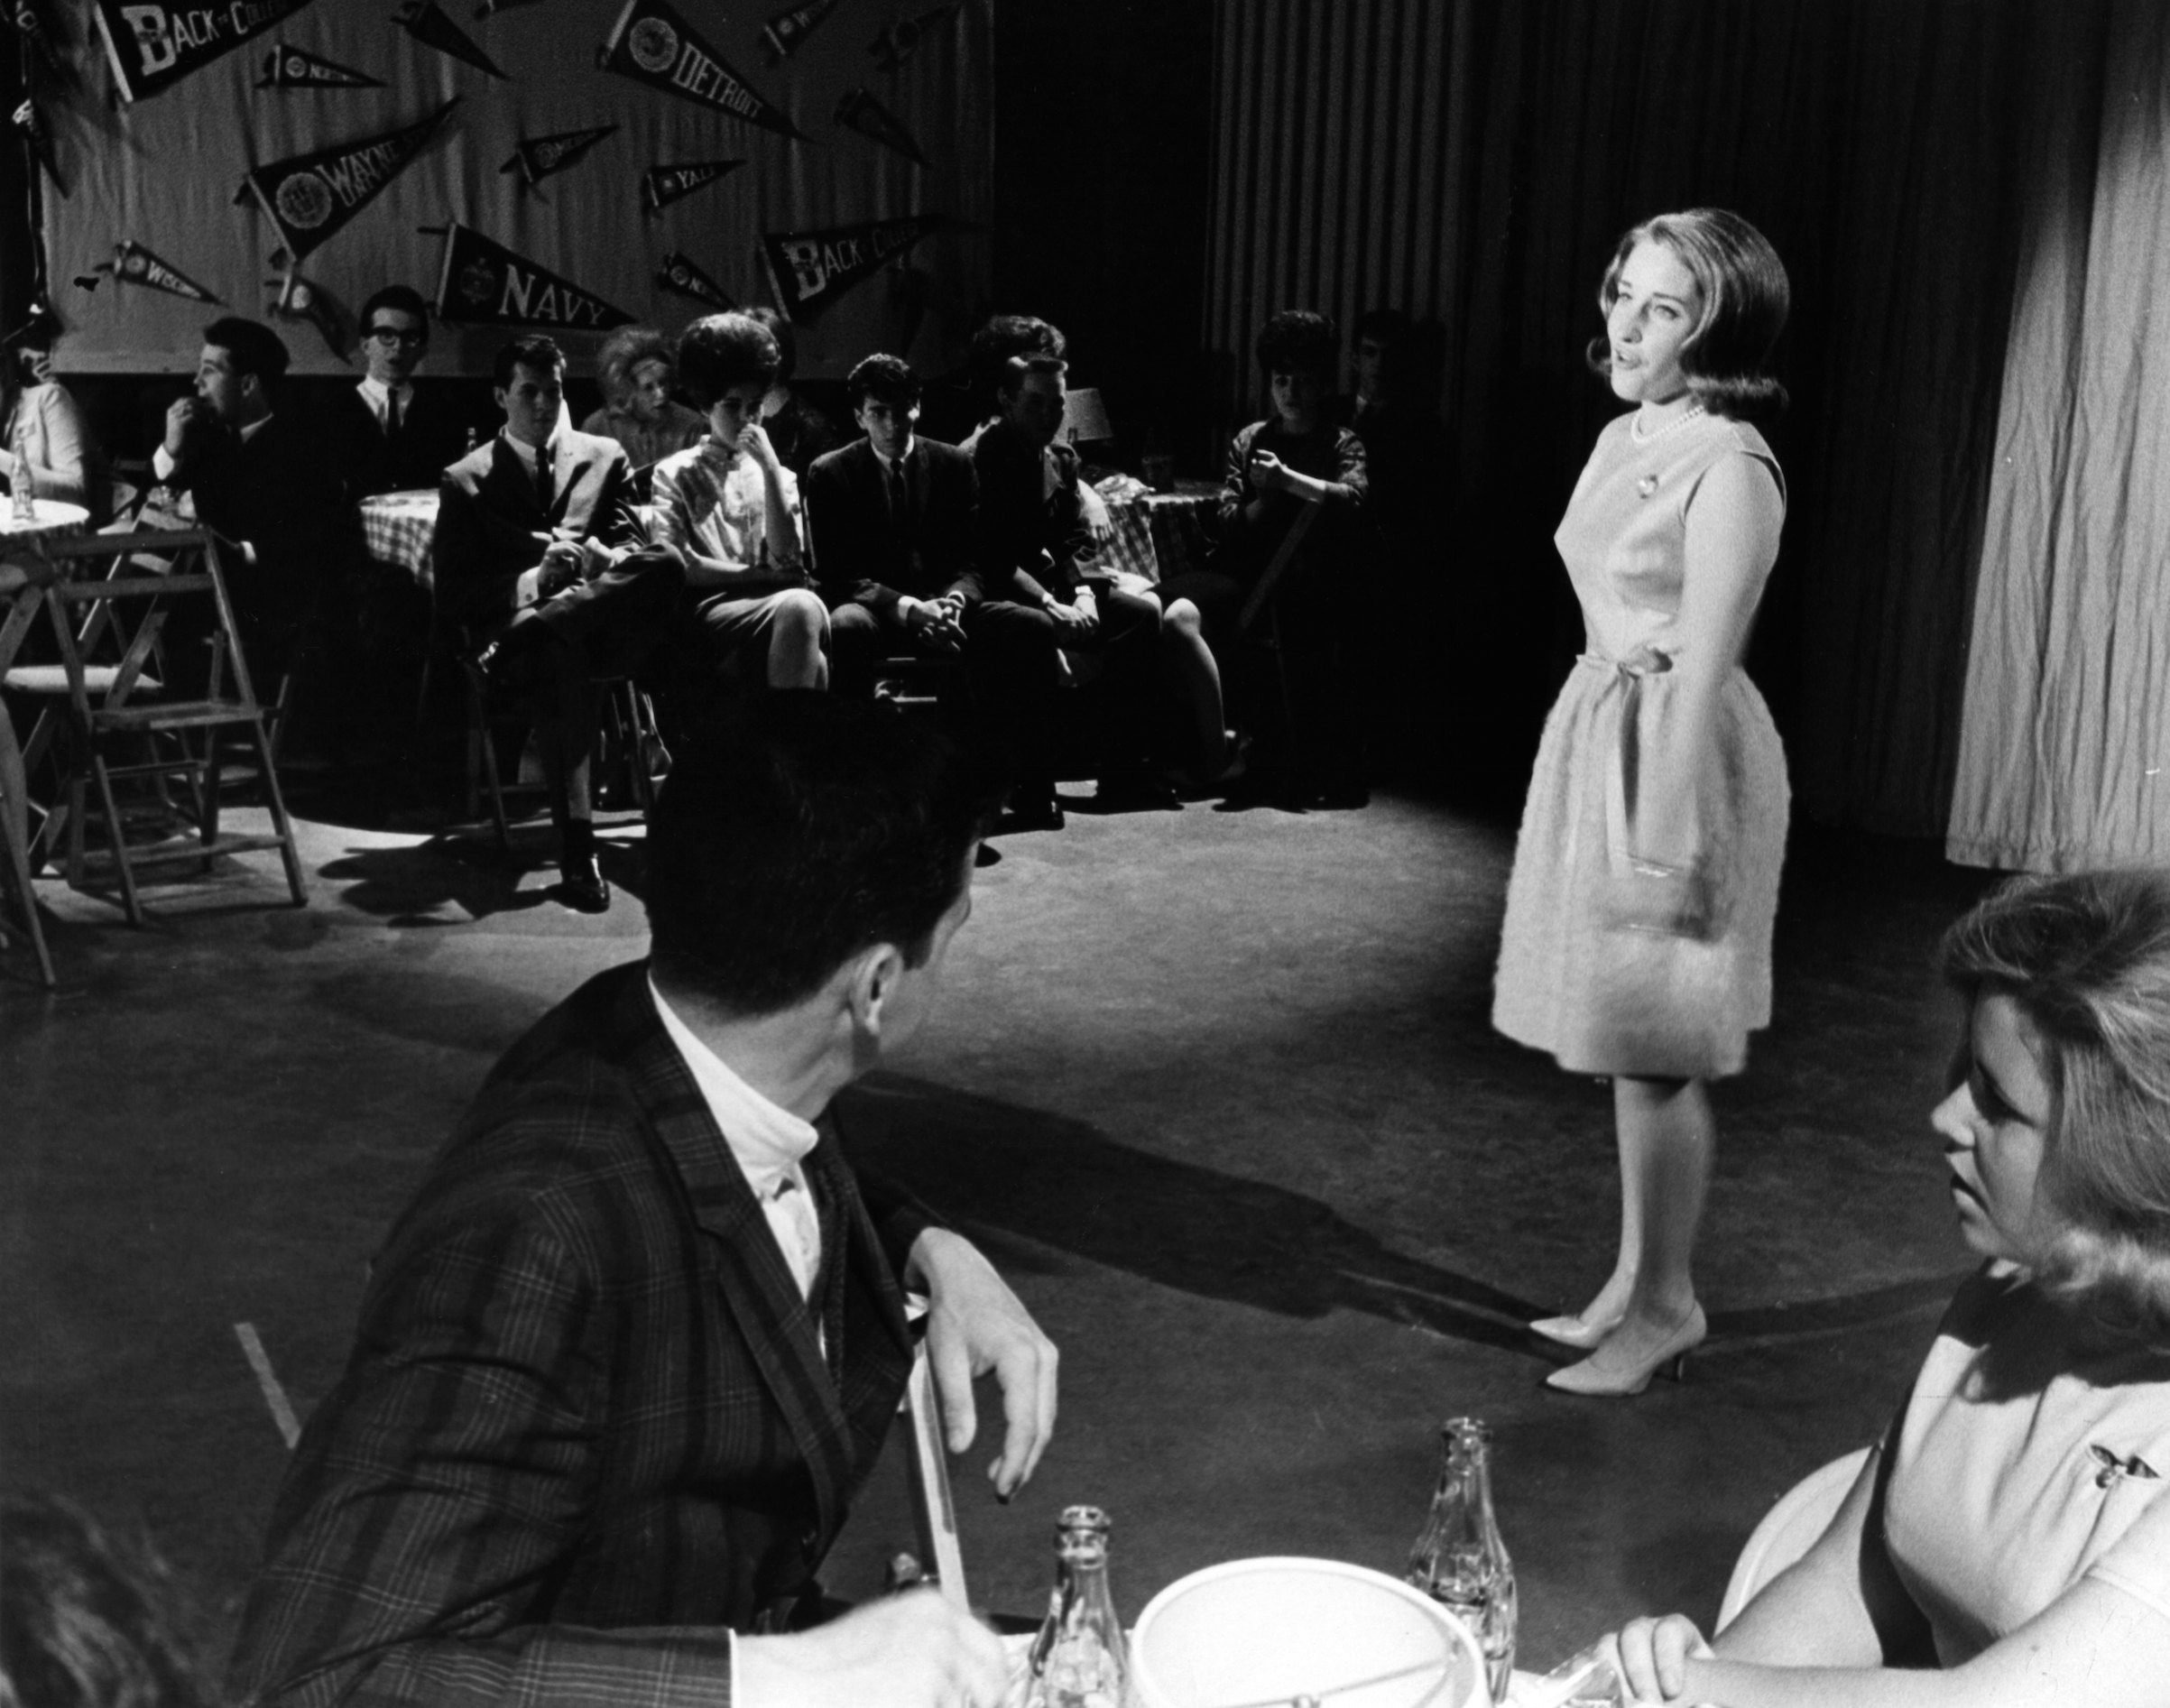 Singer Lesley Gore performs on a TV show  circa 1963 (Michael Ochs Archives/Getty Images)